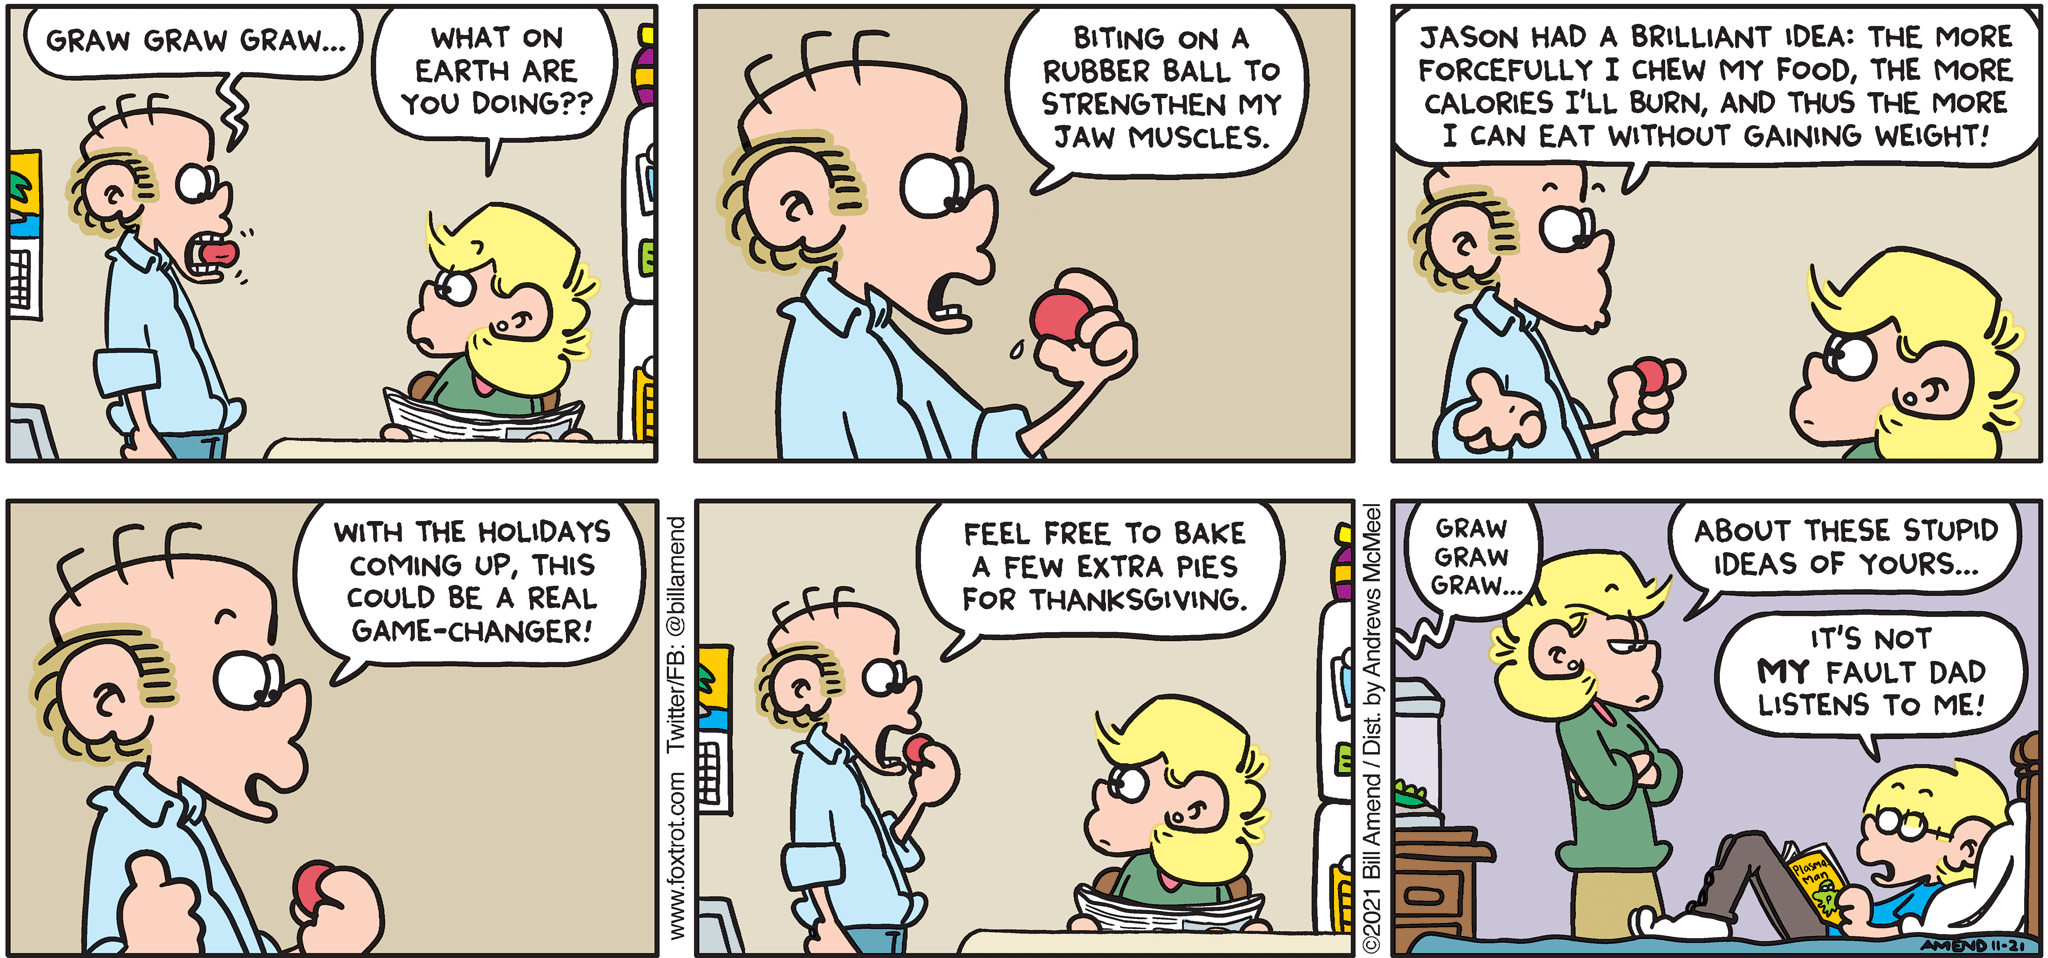 FoxTrot comic strip by Bill Amend - "Holiday Ball" published November 21, 2021 - Transcript: Roger Fox: Graw Graw Graw... Andy Fox: What on Earth are you doing?? Roger Fox: Biting on a rubber ball to strengthen my jaw muscles. Jason had a brilliant idea: the more forcefully I chew my food, the more calories I'll burn, and thus the more I can eat without gaining weight! With the holidays coming up, this could be a real game-changer! Feel free to bake a few extra pies for Thanksgiving. Graw. Graw. Graw. Andy Fox: About these stupid ideas of yours... Jason Fox: It's not my fault dad listens to me!